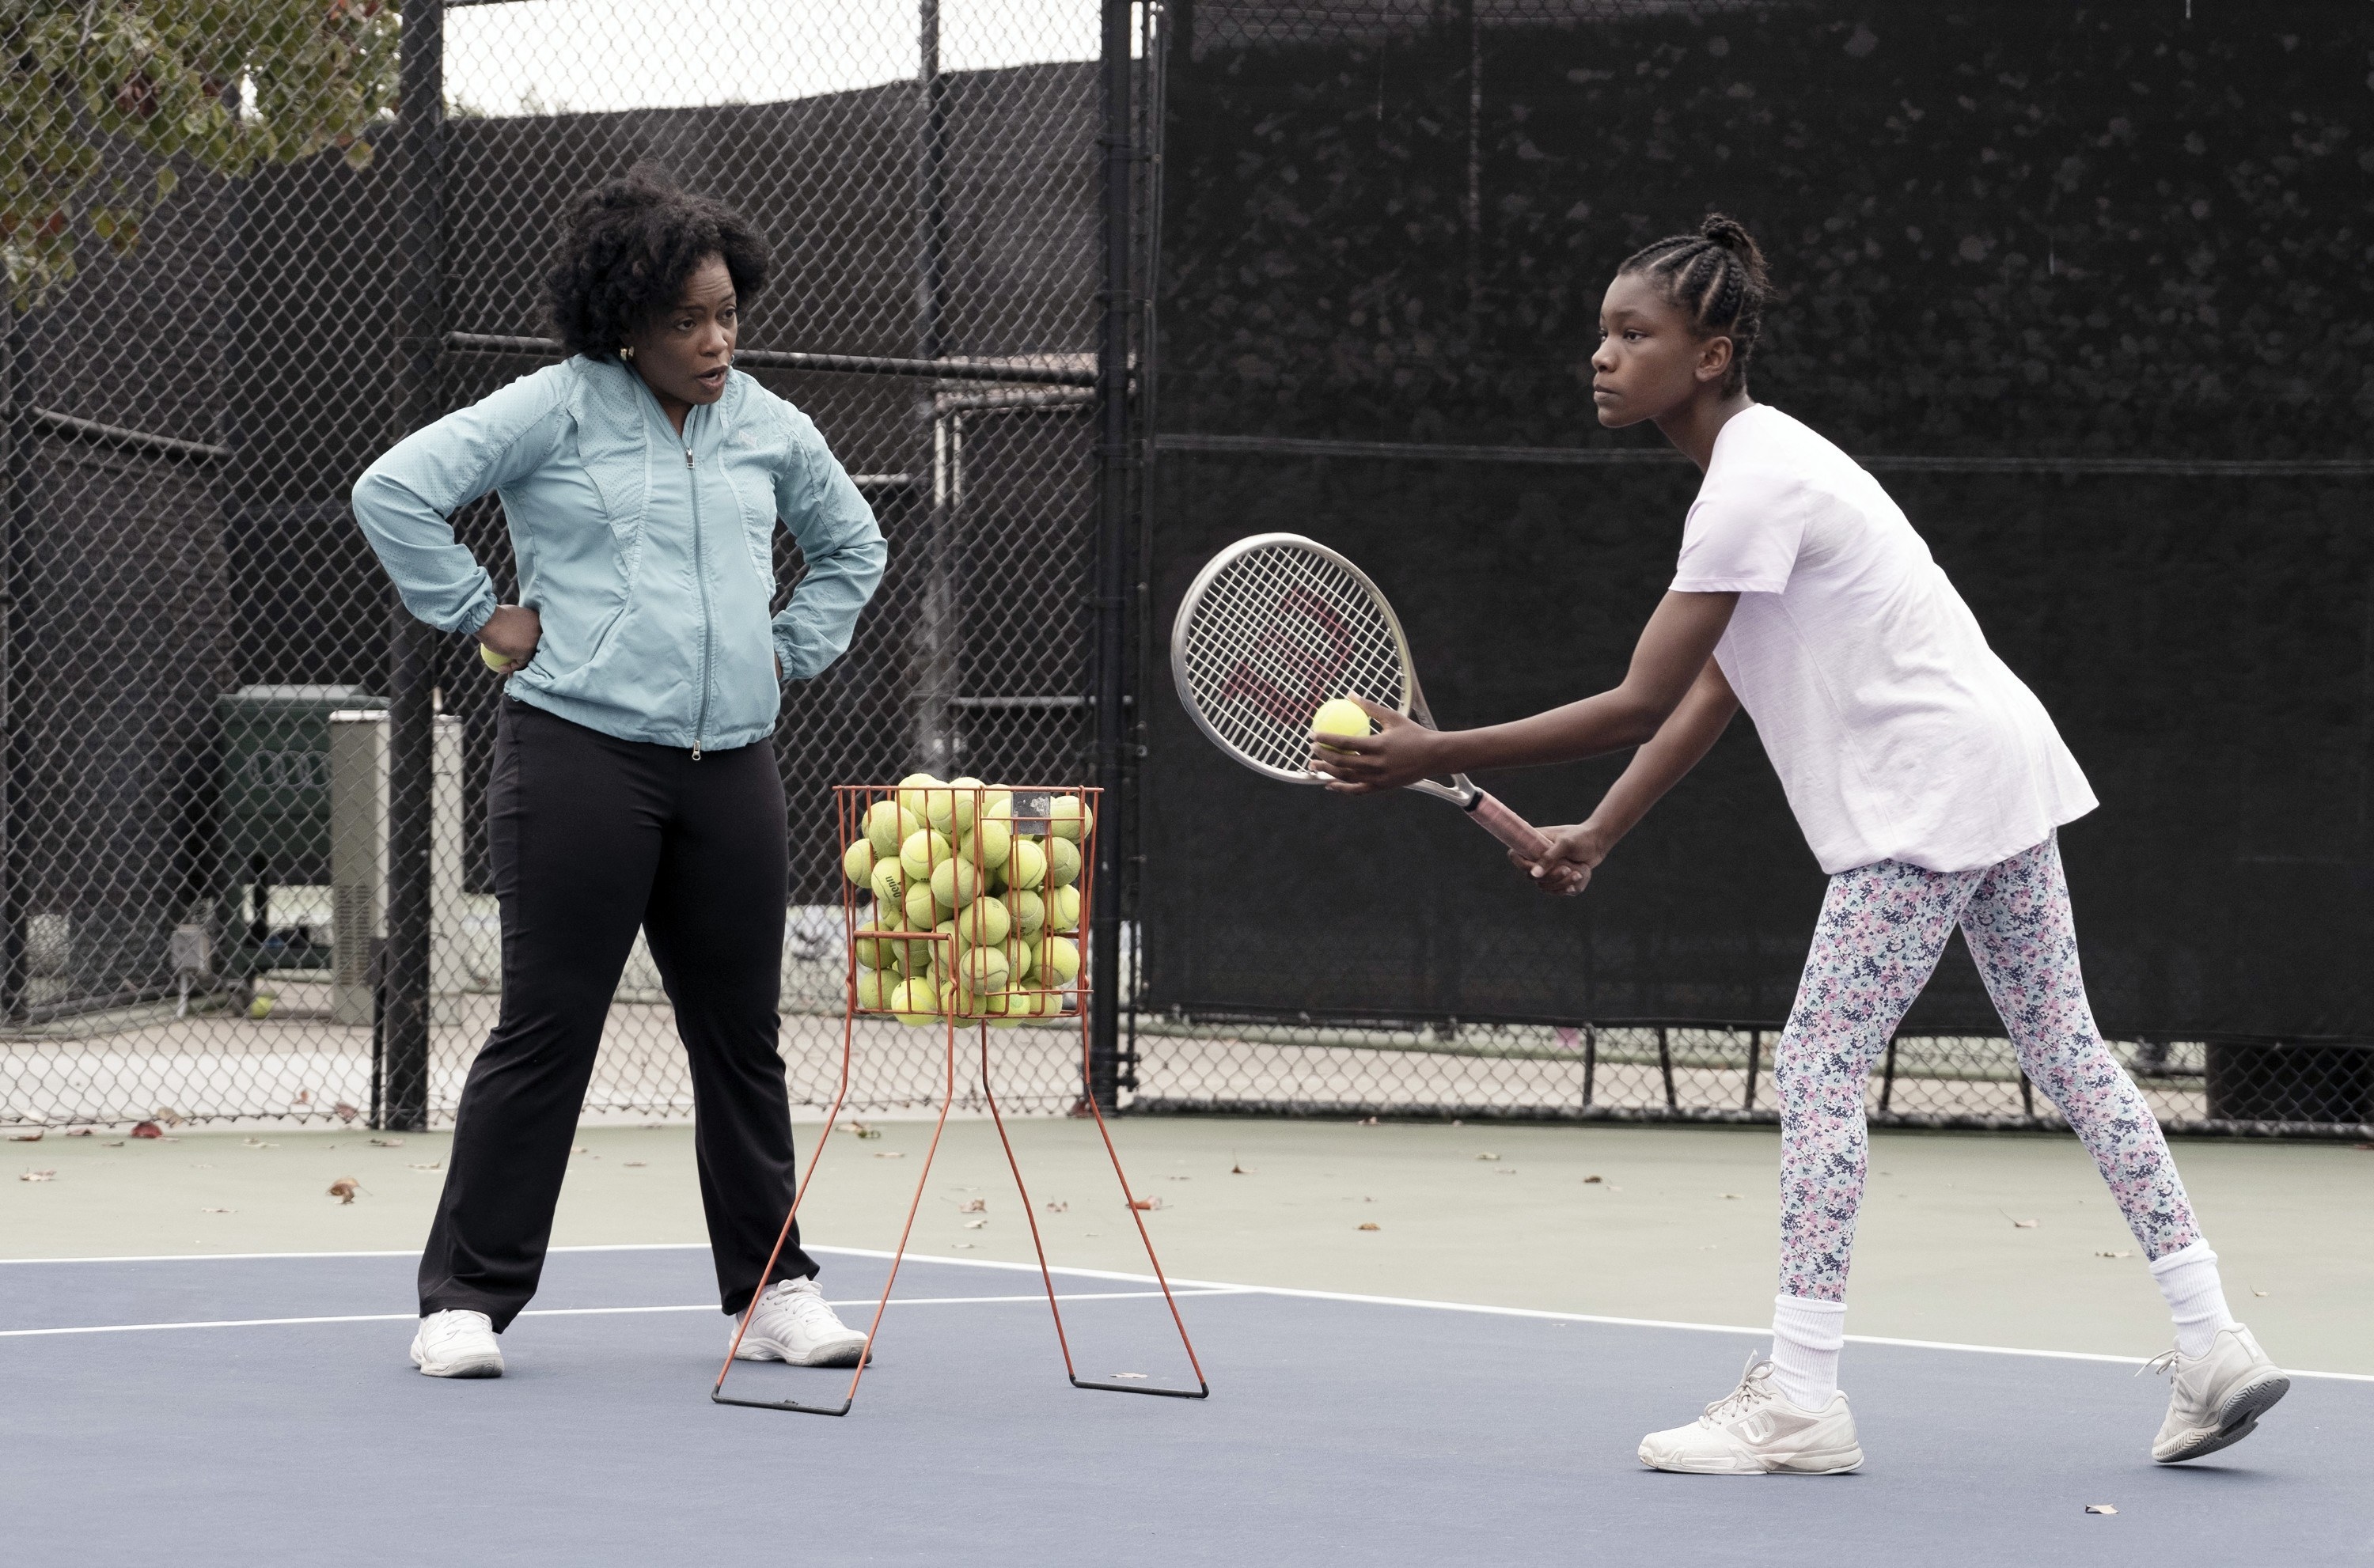 Aunjanue Ellis as Oracene &quot;Brandy&quot; Williams and Demi Singleton as Serena Williams about to serve a tennis ball